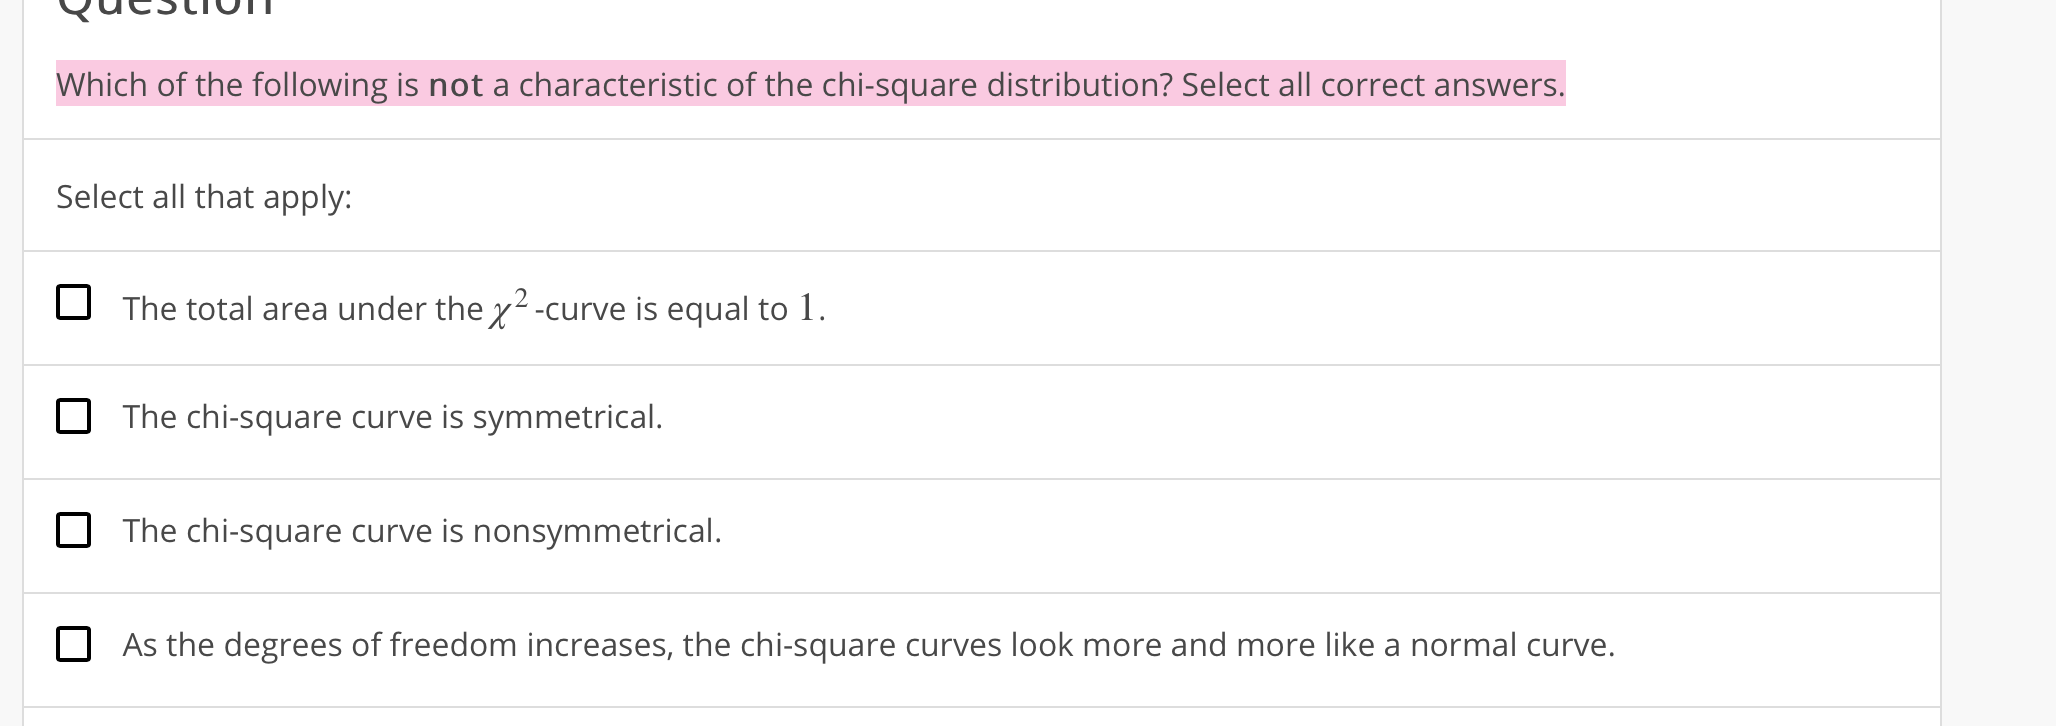 Which of the following is not a characteristic of the chi-square distribution? Select all correct answers.
Select all that apply:
The total area under the2-curve is equal to 1.
The chi-square curve is symmetrical.
The chi-square curve is nonsymmetrical.
As the degrees of freedom increases, the chi-square curves look more and more like a normal curve.
